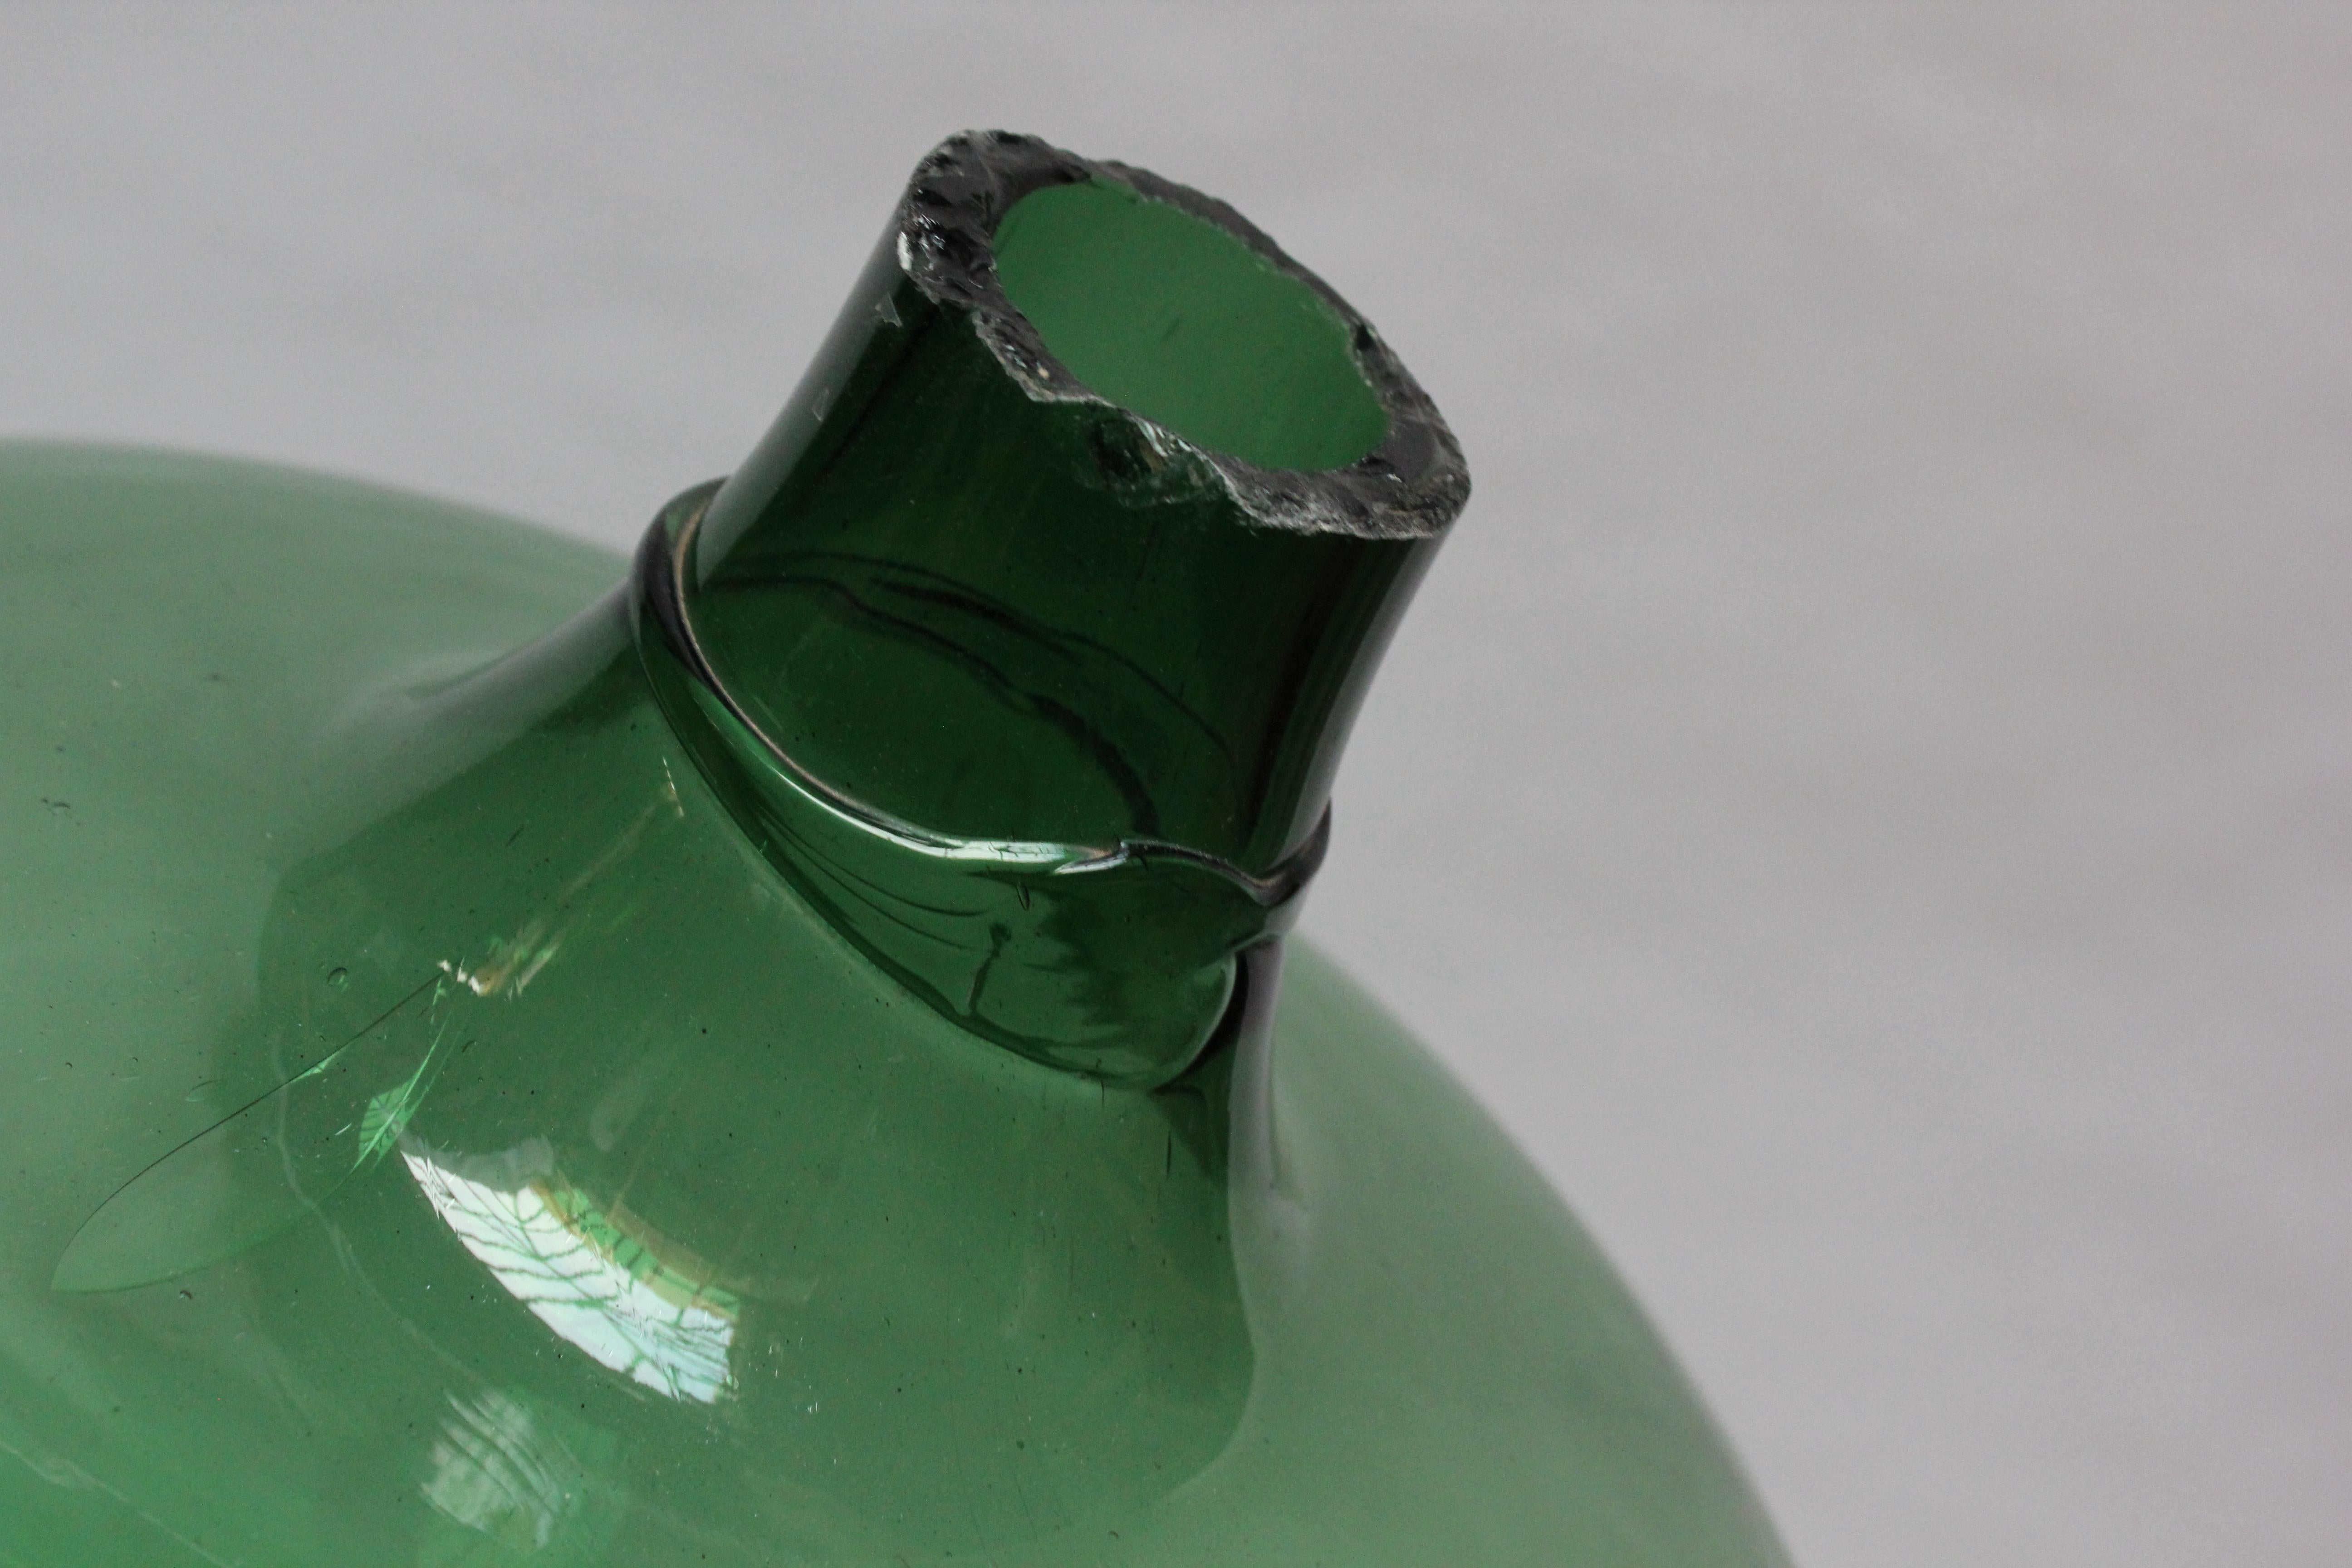 Antique Mouth Blown Glass Bulbous Demijohn in Emerald Green 12